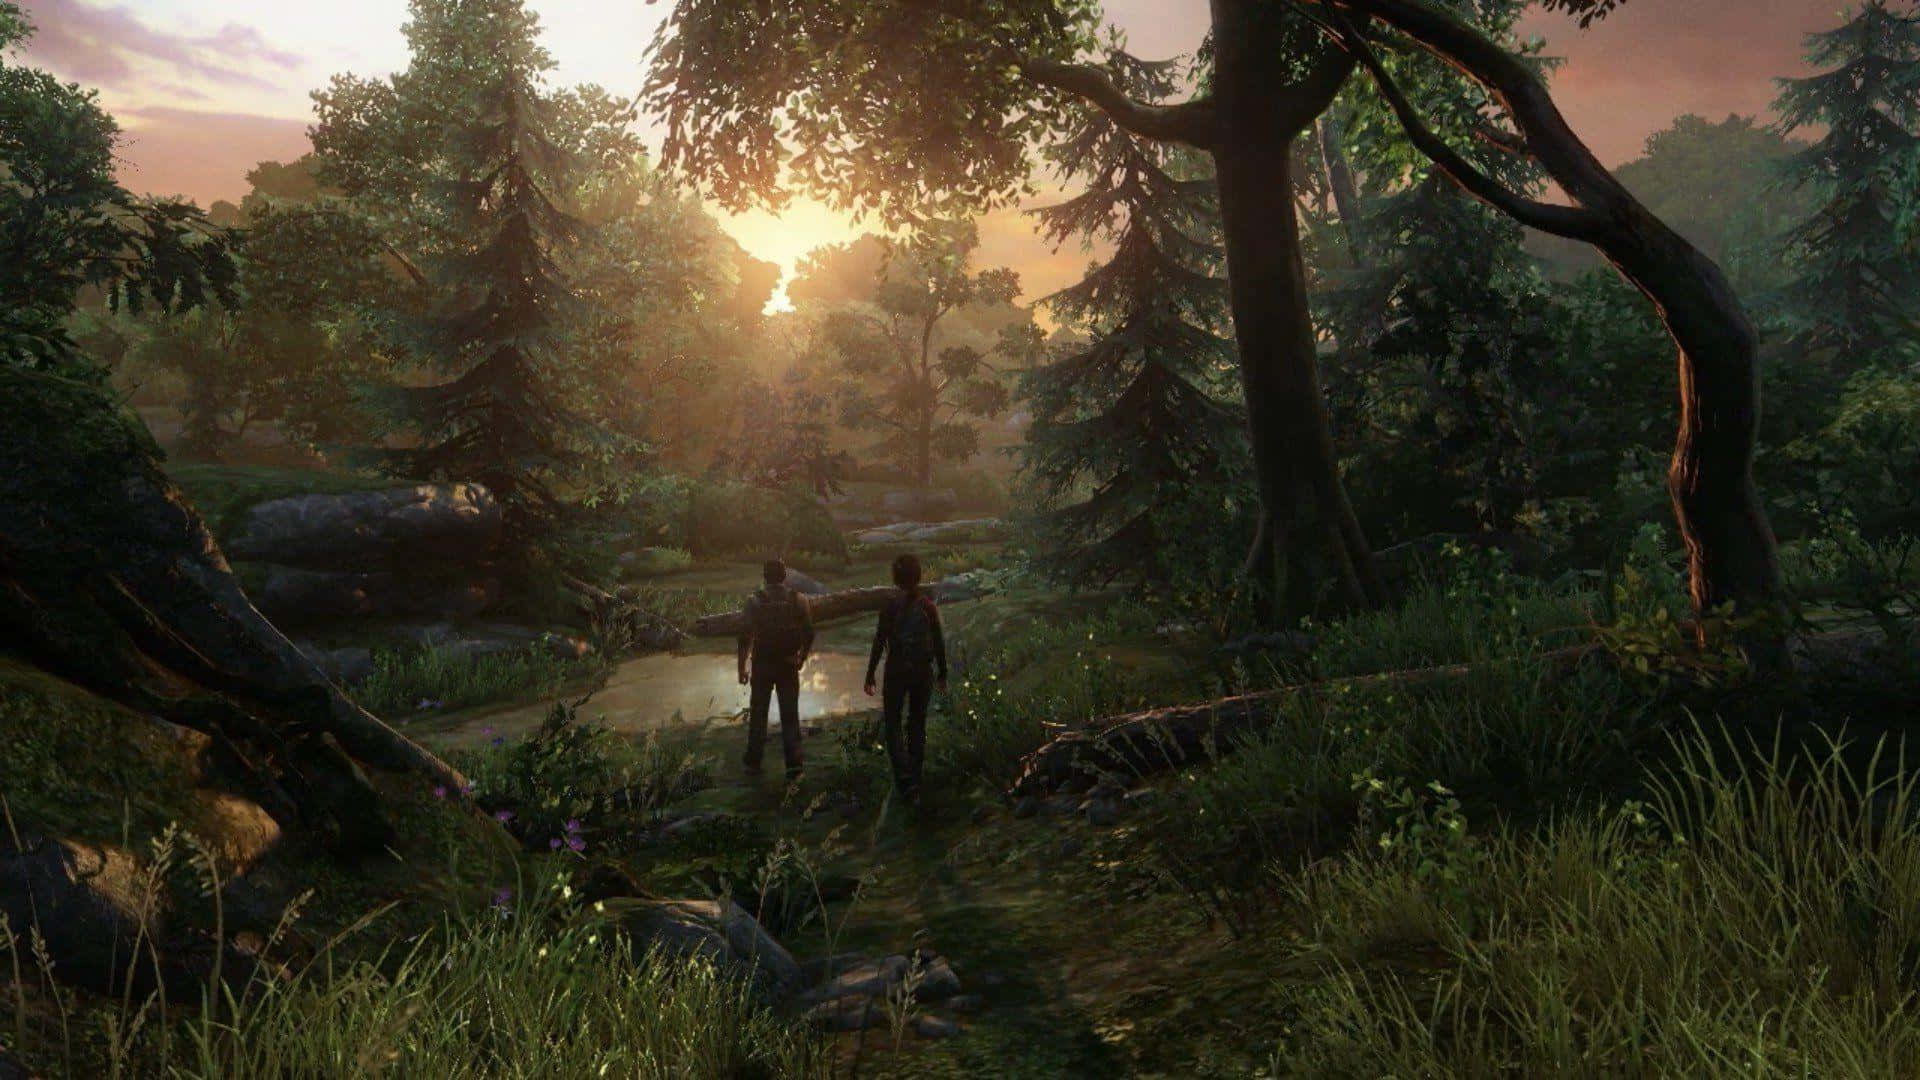 Ellie and Joel exploring a post-apocalyptic world in The Last of Us video game